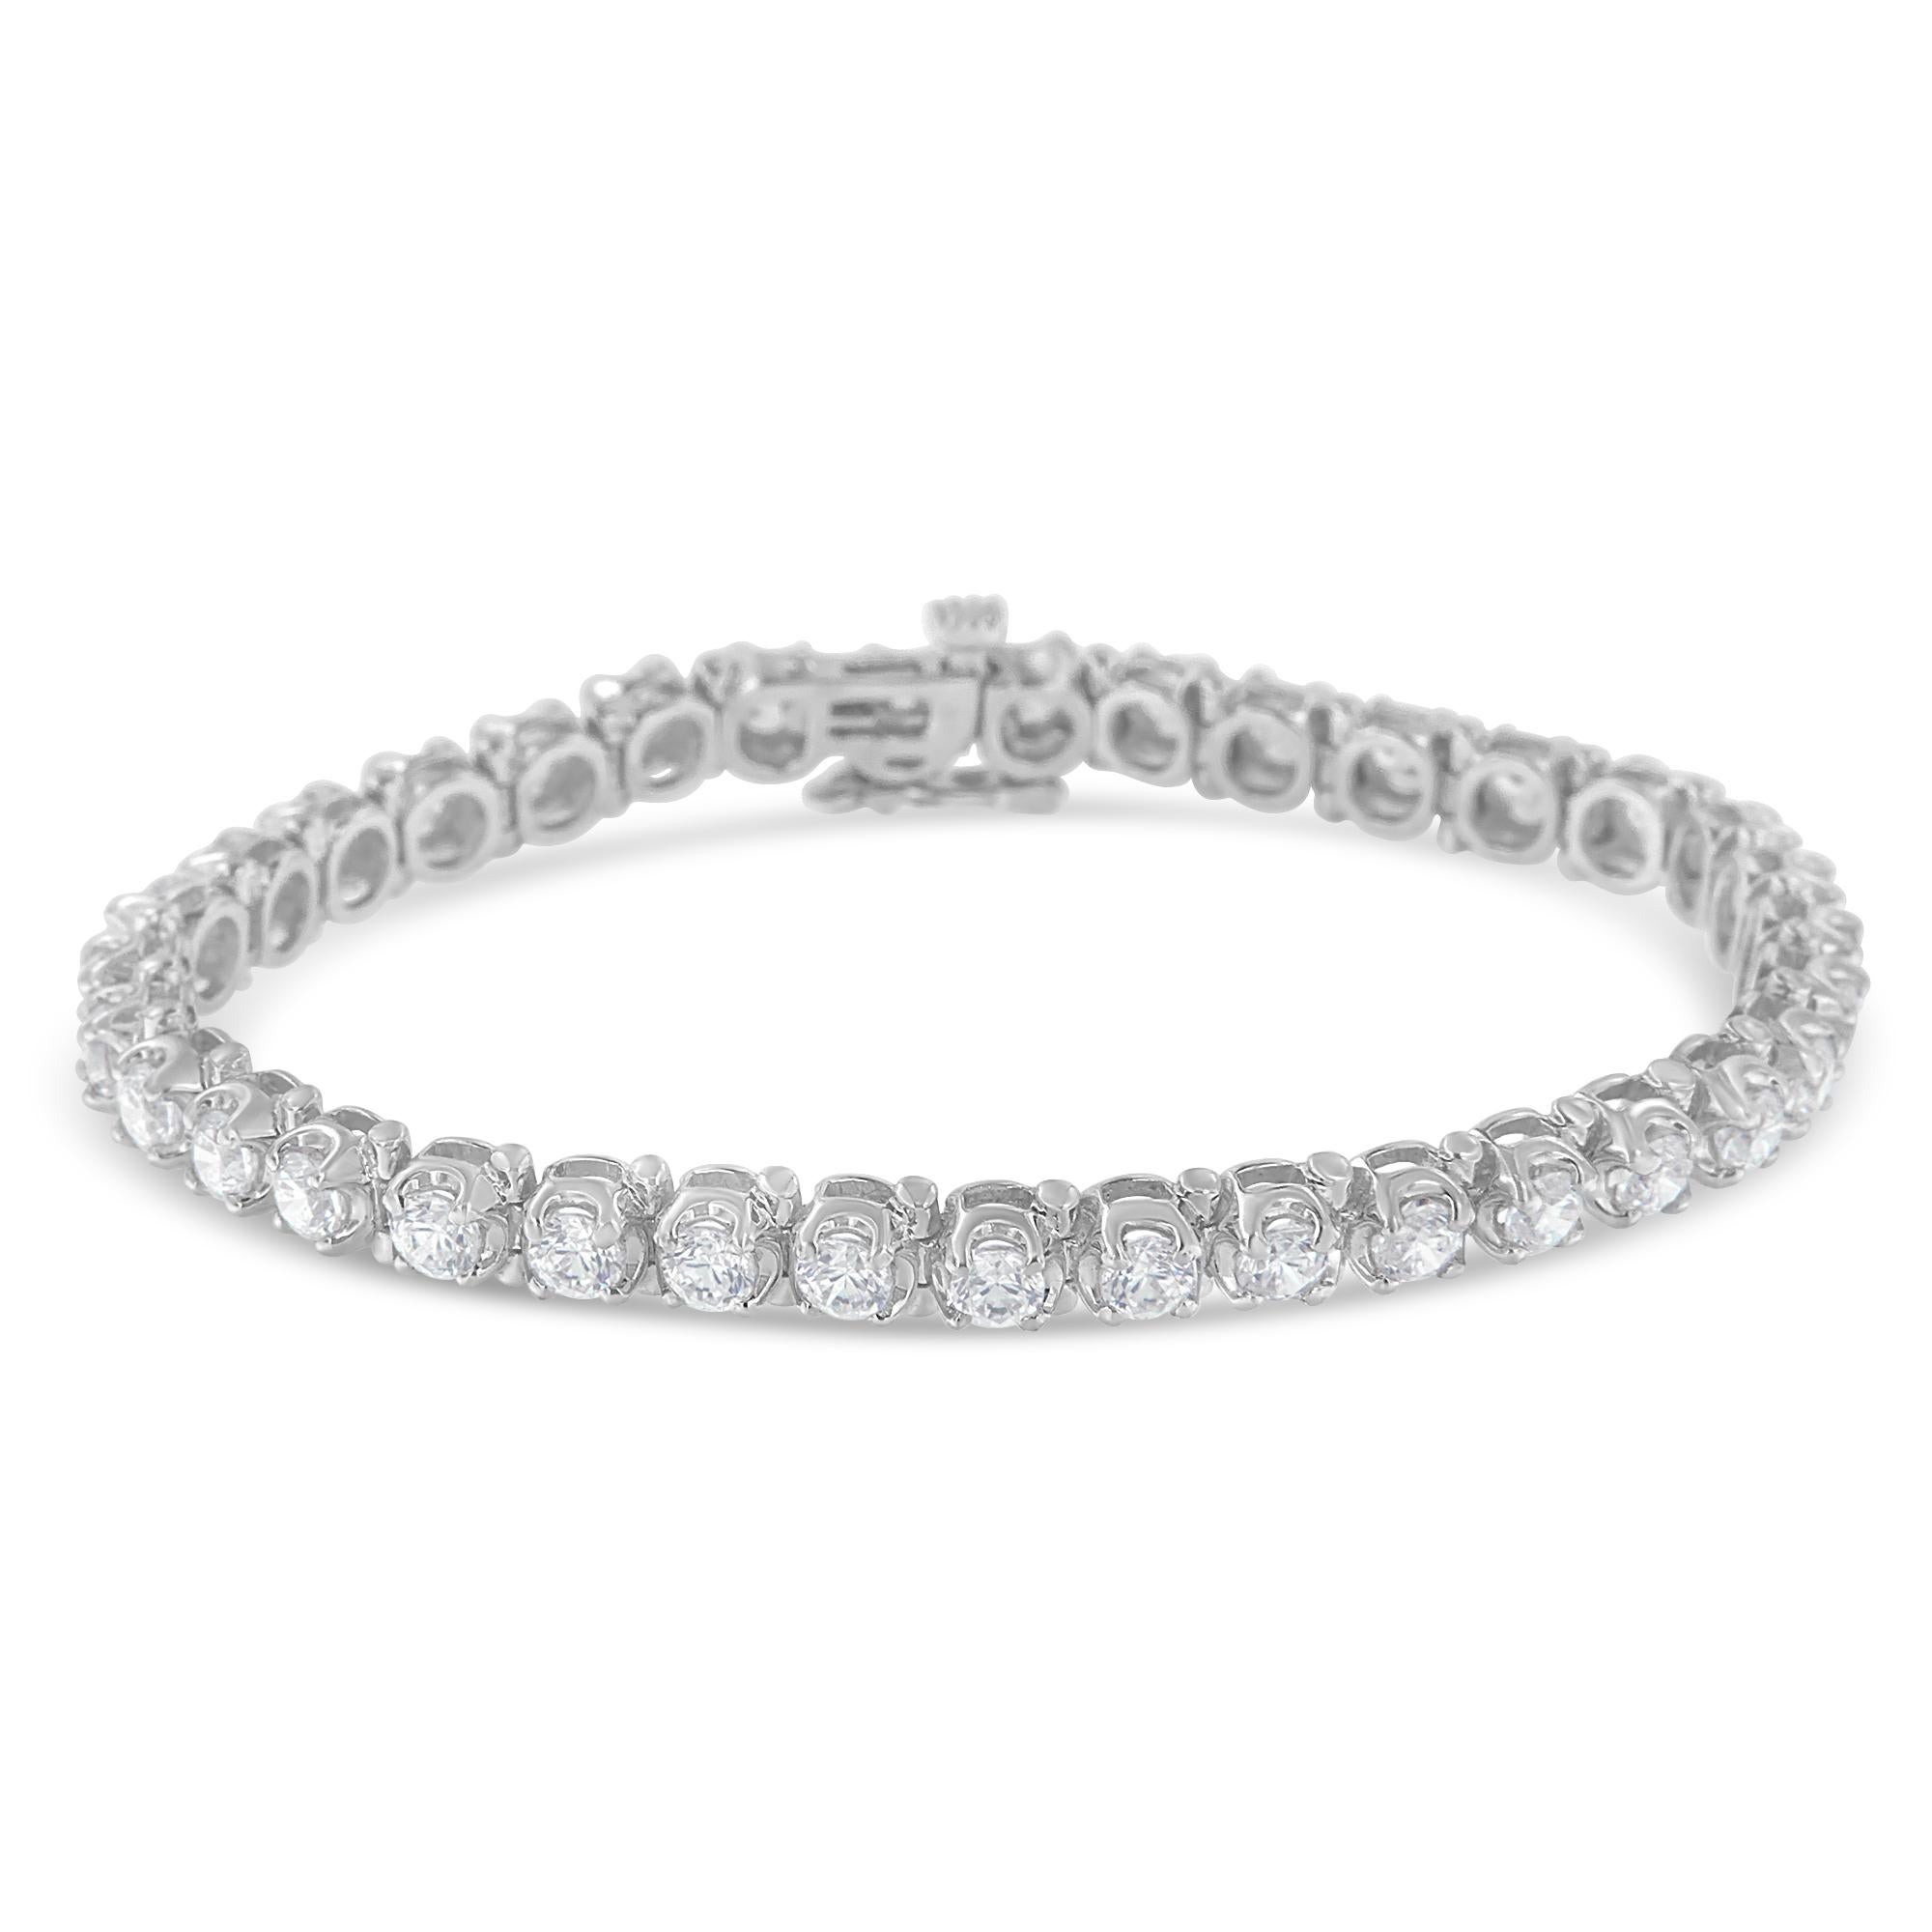 A must have for any serious jewelry collection, this breathtaking 14k white gold tennis bracelet boasts an impressive 7 ct total diamond weight. Embellished in an elegant prong setting sits 35 round-cut, natural diamonds. This is the perfect